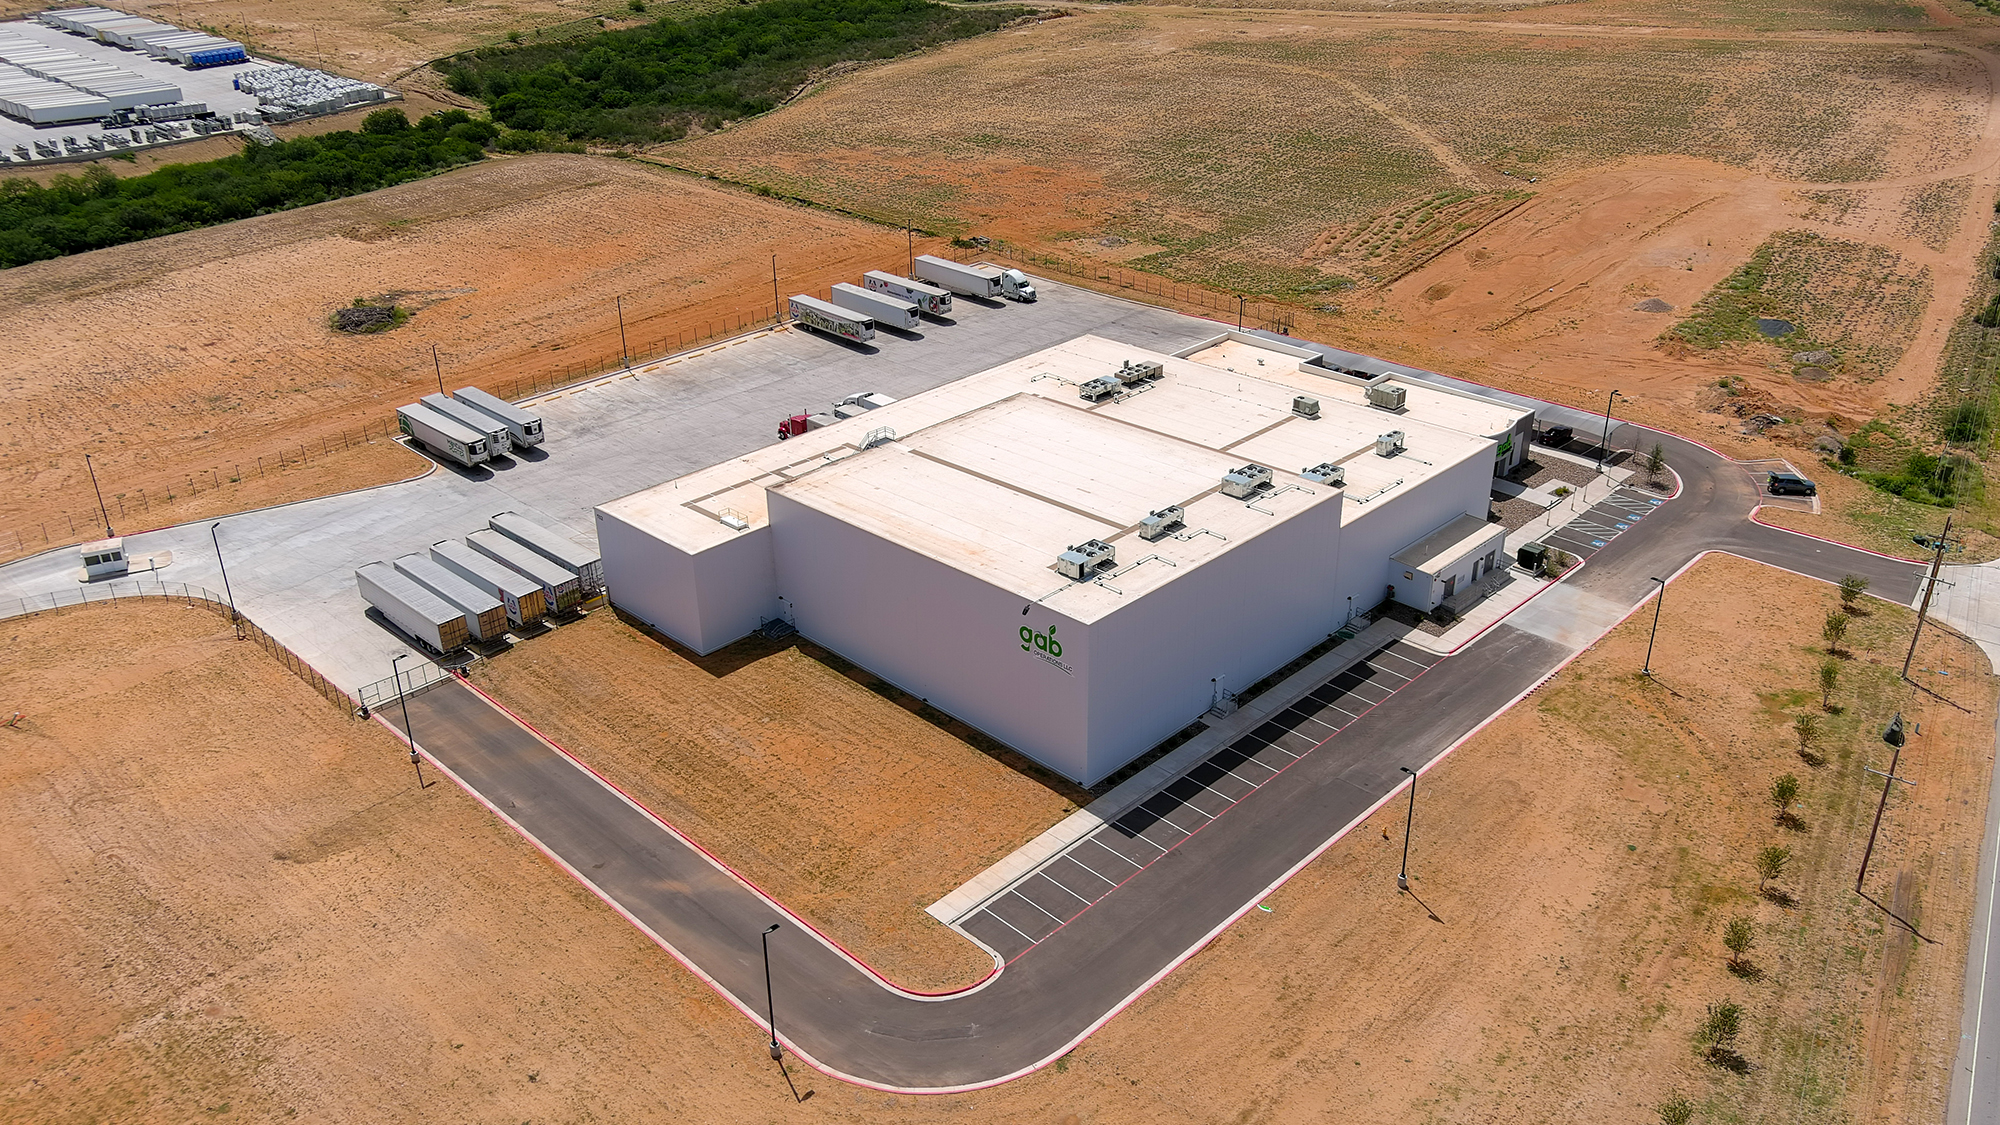 GAB Operations commissioned A M King to design and build a new cold storage distribution center in Laredo, TX. The finished facility is pictured here. Facility renovation or new construction?